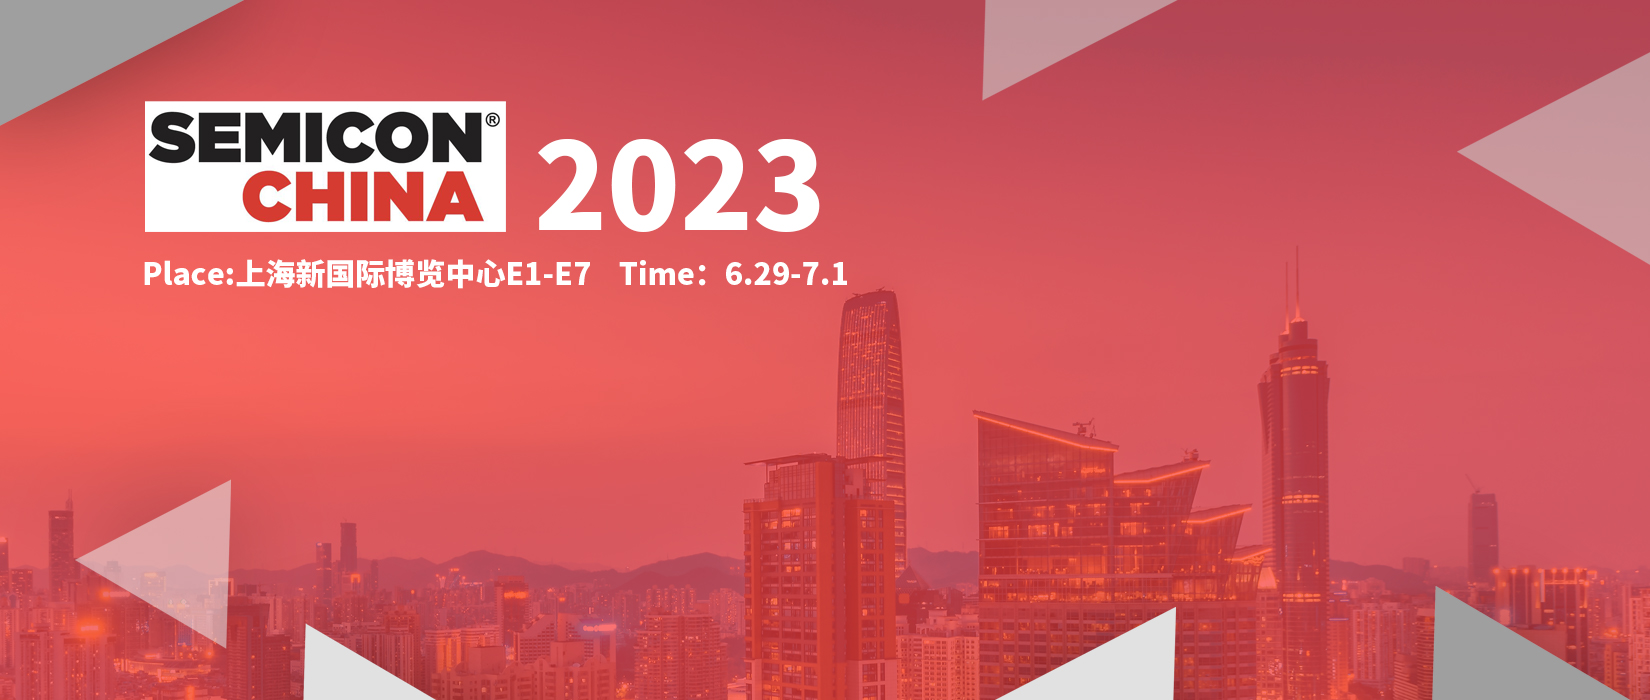 June 29 to July 1，2023，SEMISHARE will attend SEMICON/FPD China 2023, Shanghai New International Expo Center E1-E7.